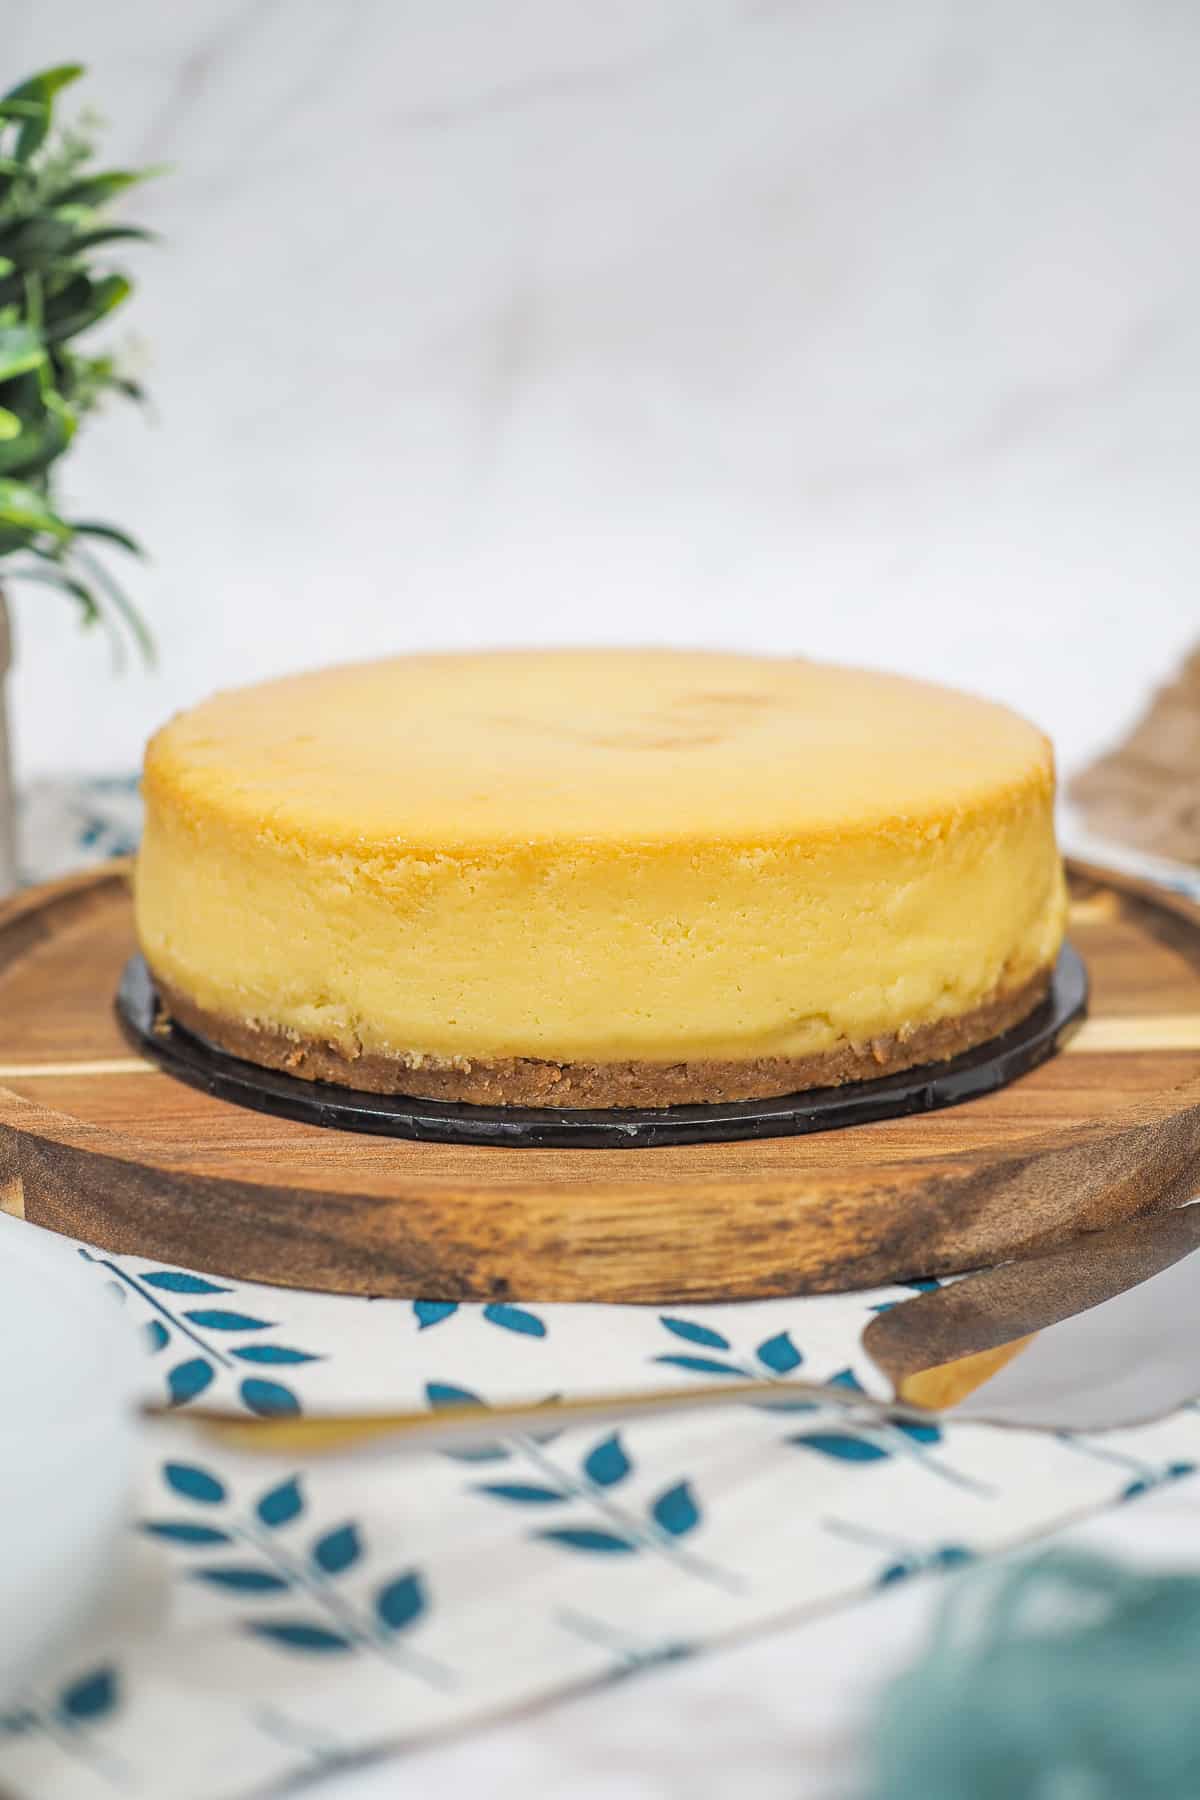 A round durian cheesecake on a wooden tray.